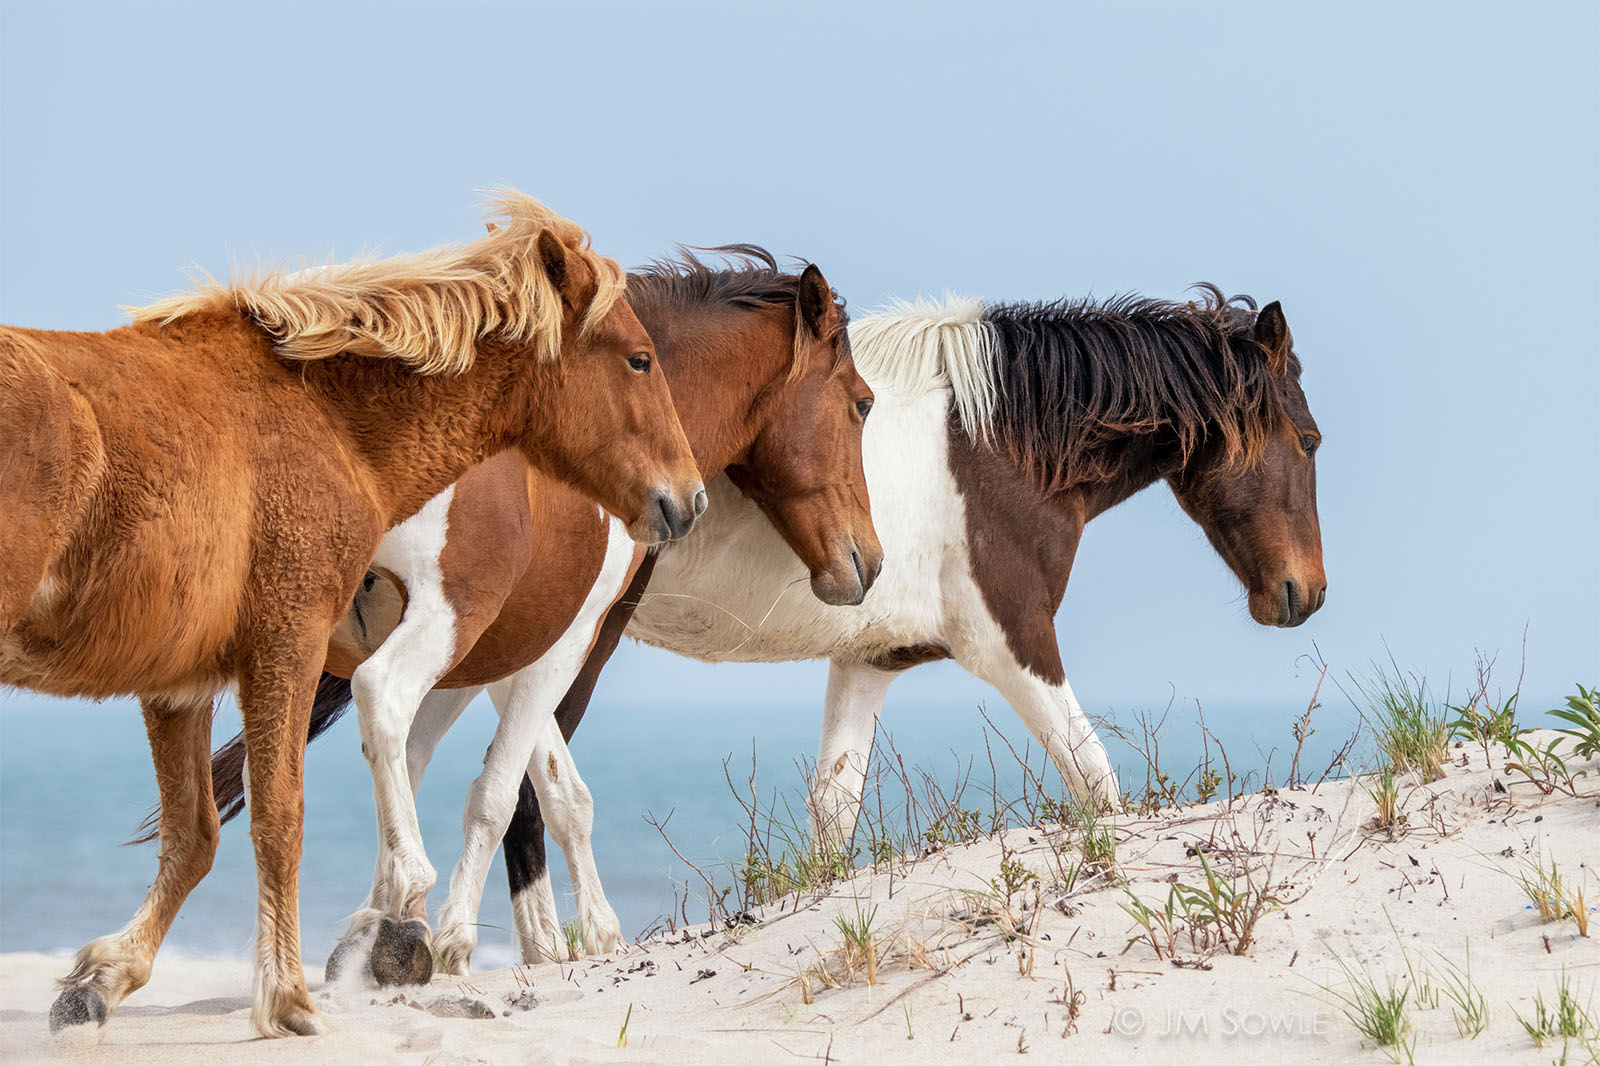 _JMS0158_1600.jpg - Horses on the beach are what brought us to Assateague, but after a few days you get accustomed to seeing them everywhere on the island.